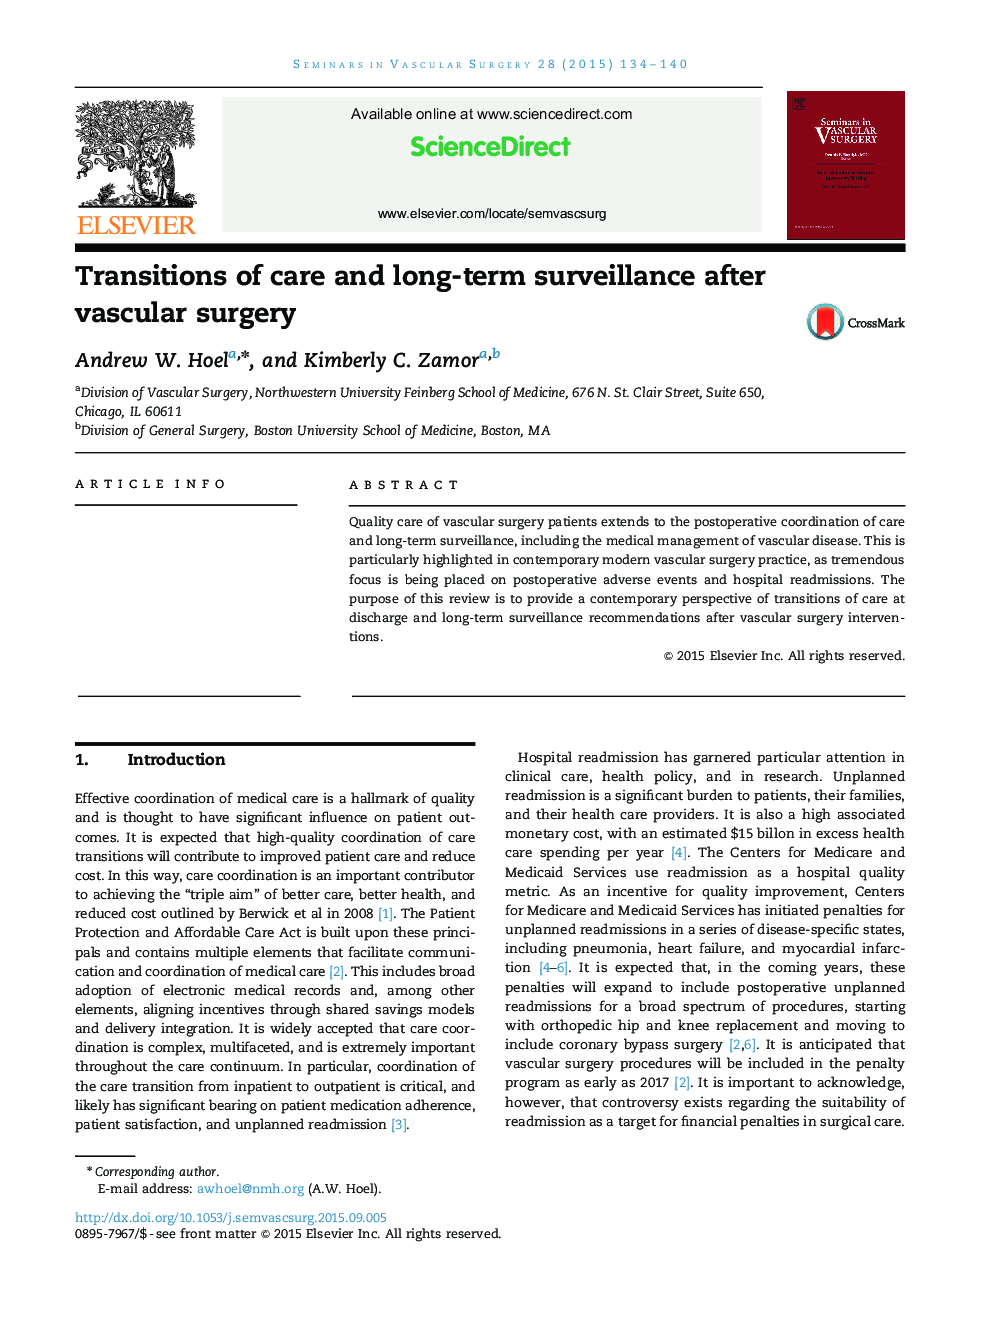 Transitions of care and long-term surveillance after vascular surgery